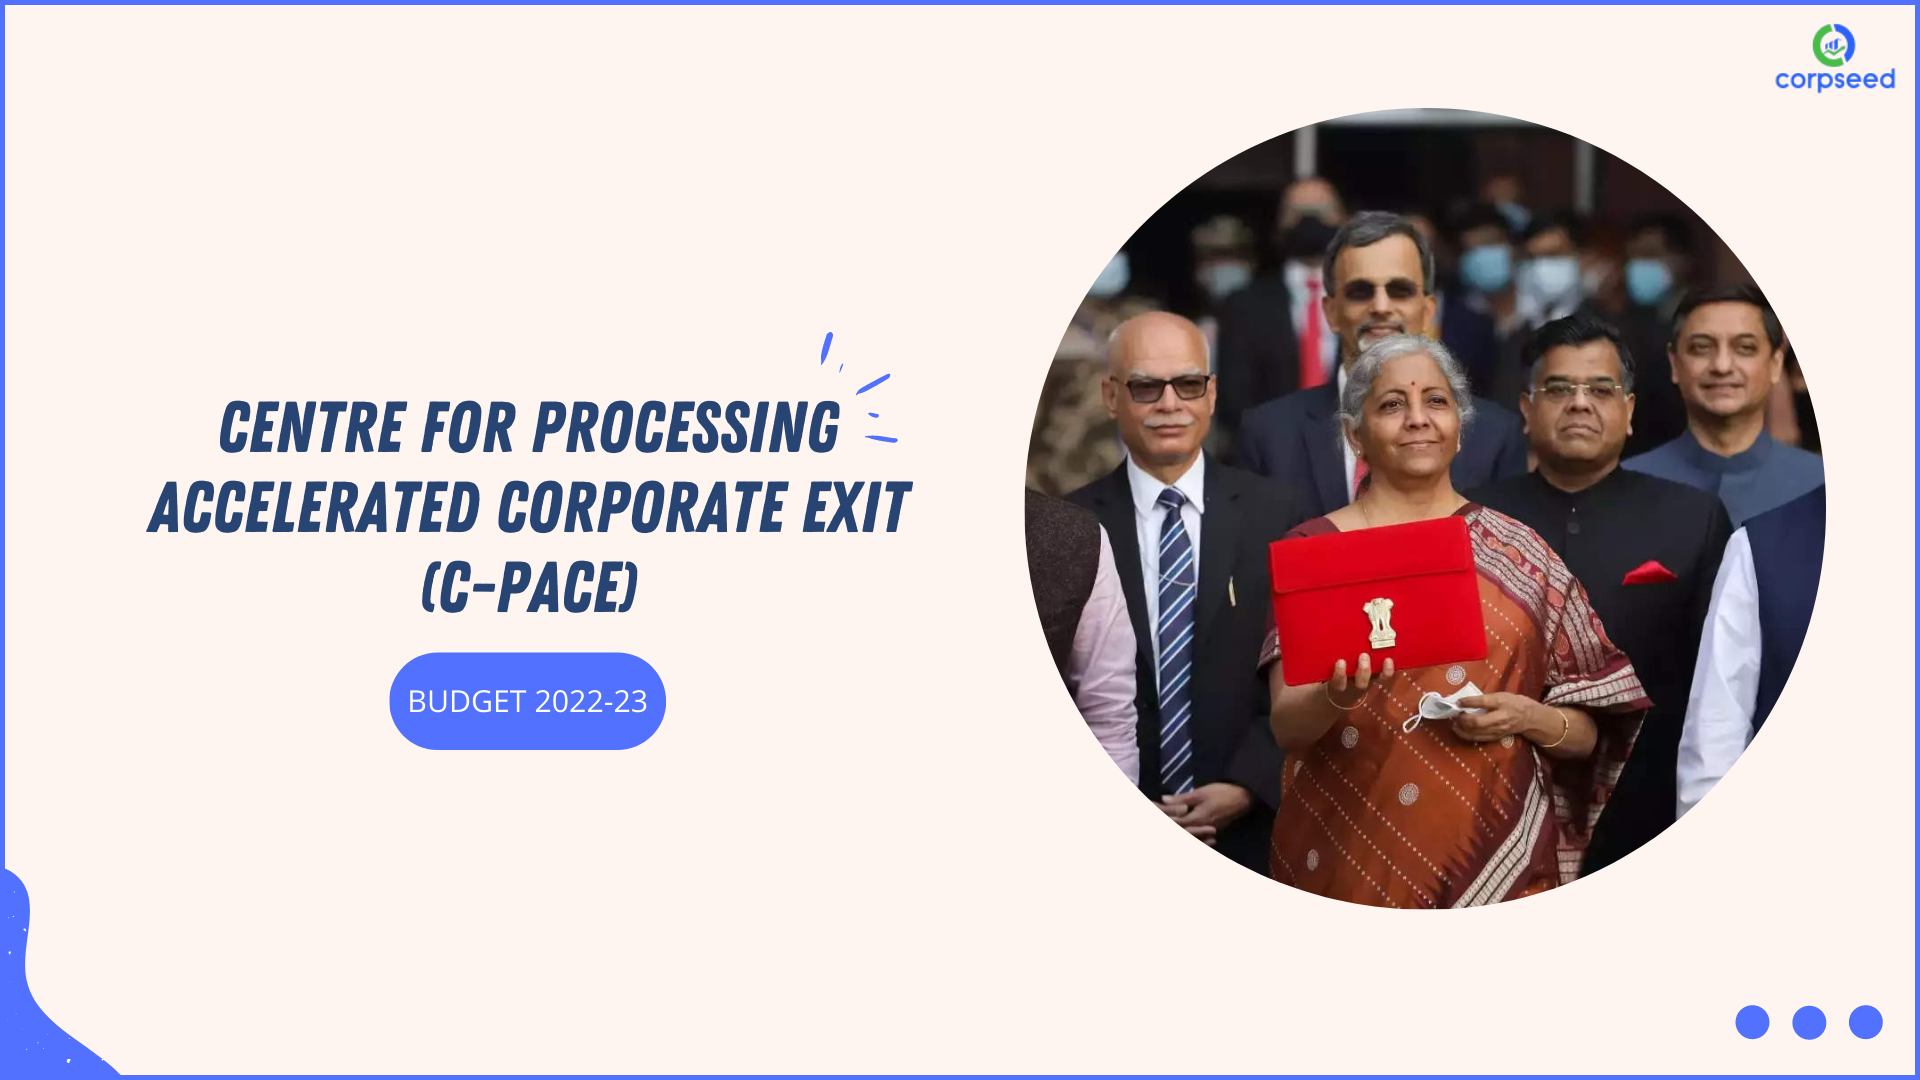 What_Is_Centre_For_Processing_Accelerated_Corporate_Exit_(C-Pace)_corpseed.png